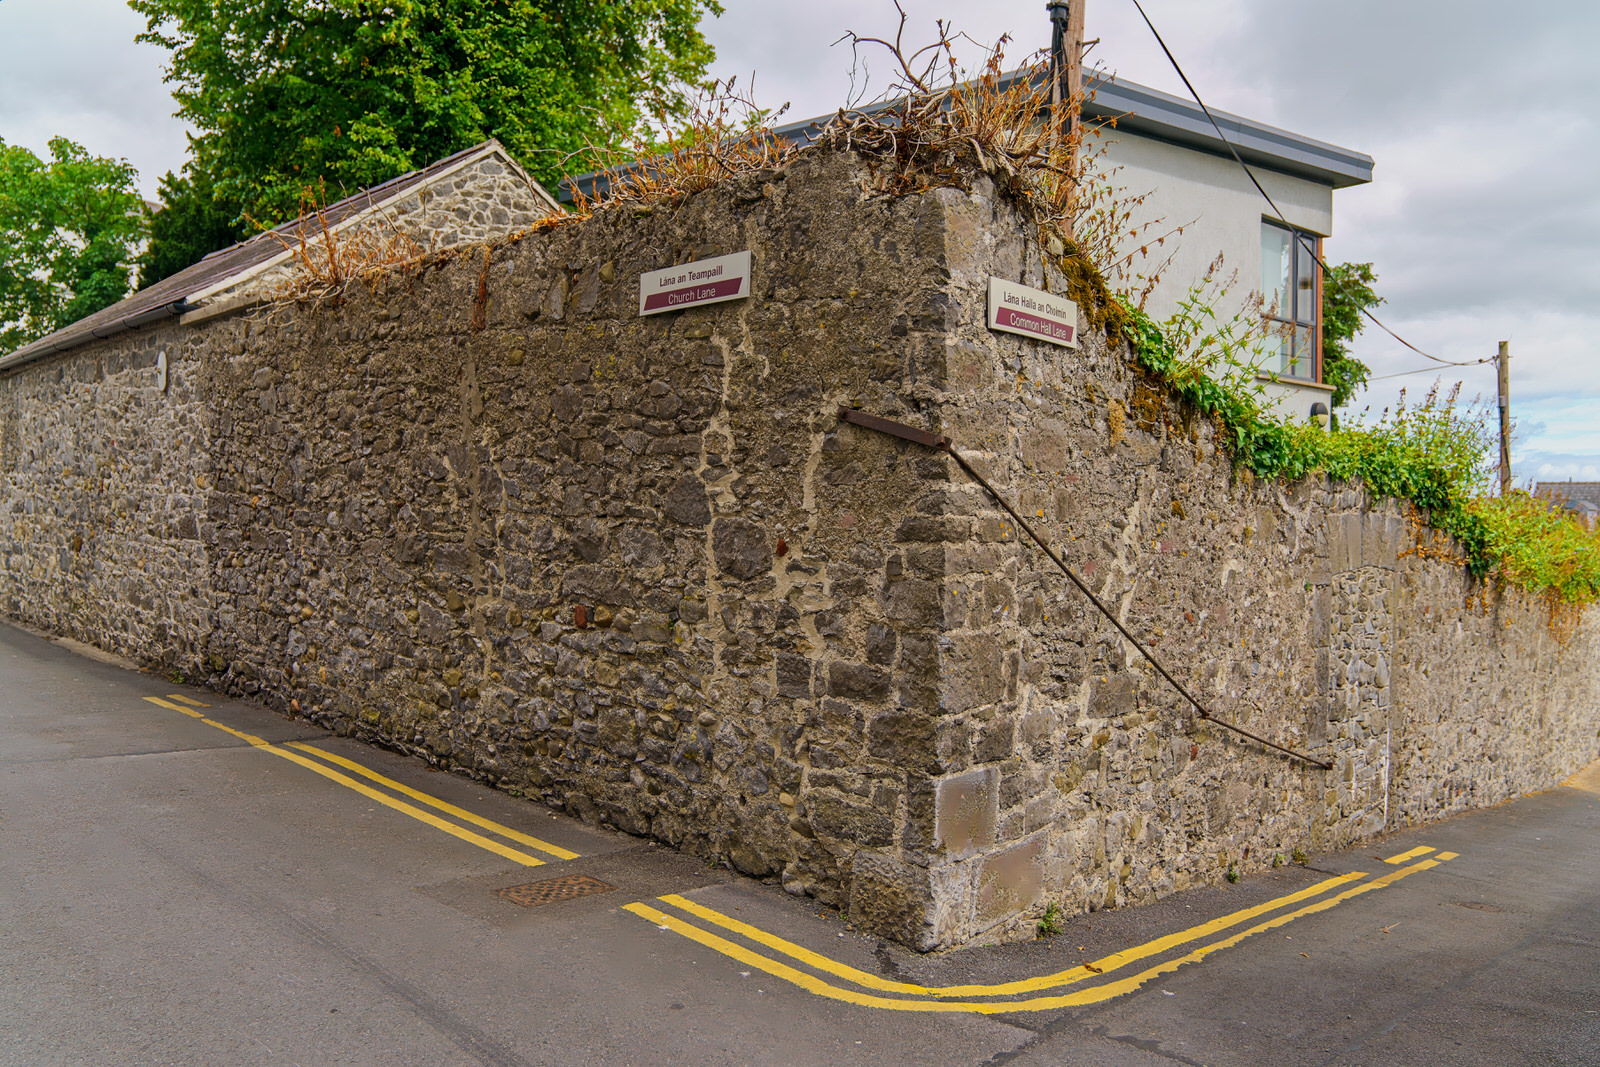 IN 2018 I EXPLORED A NARROW LANE NETWORK IN KILKENNY [DEAN STREET TO BUTT'S GREEN]-234264-1